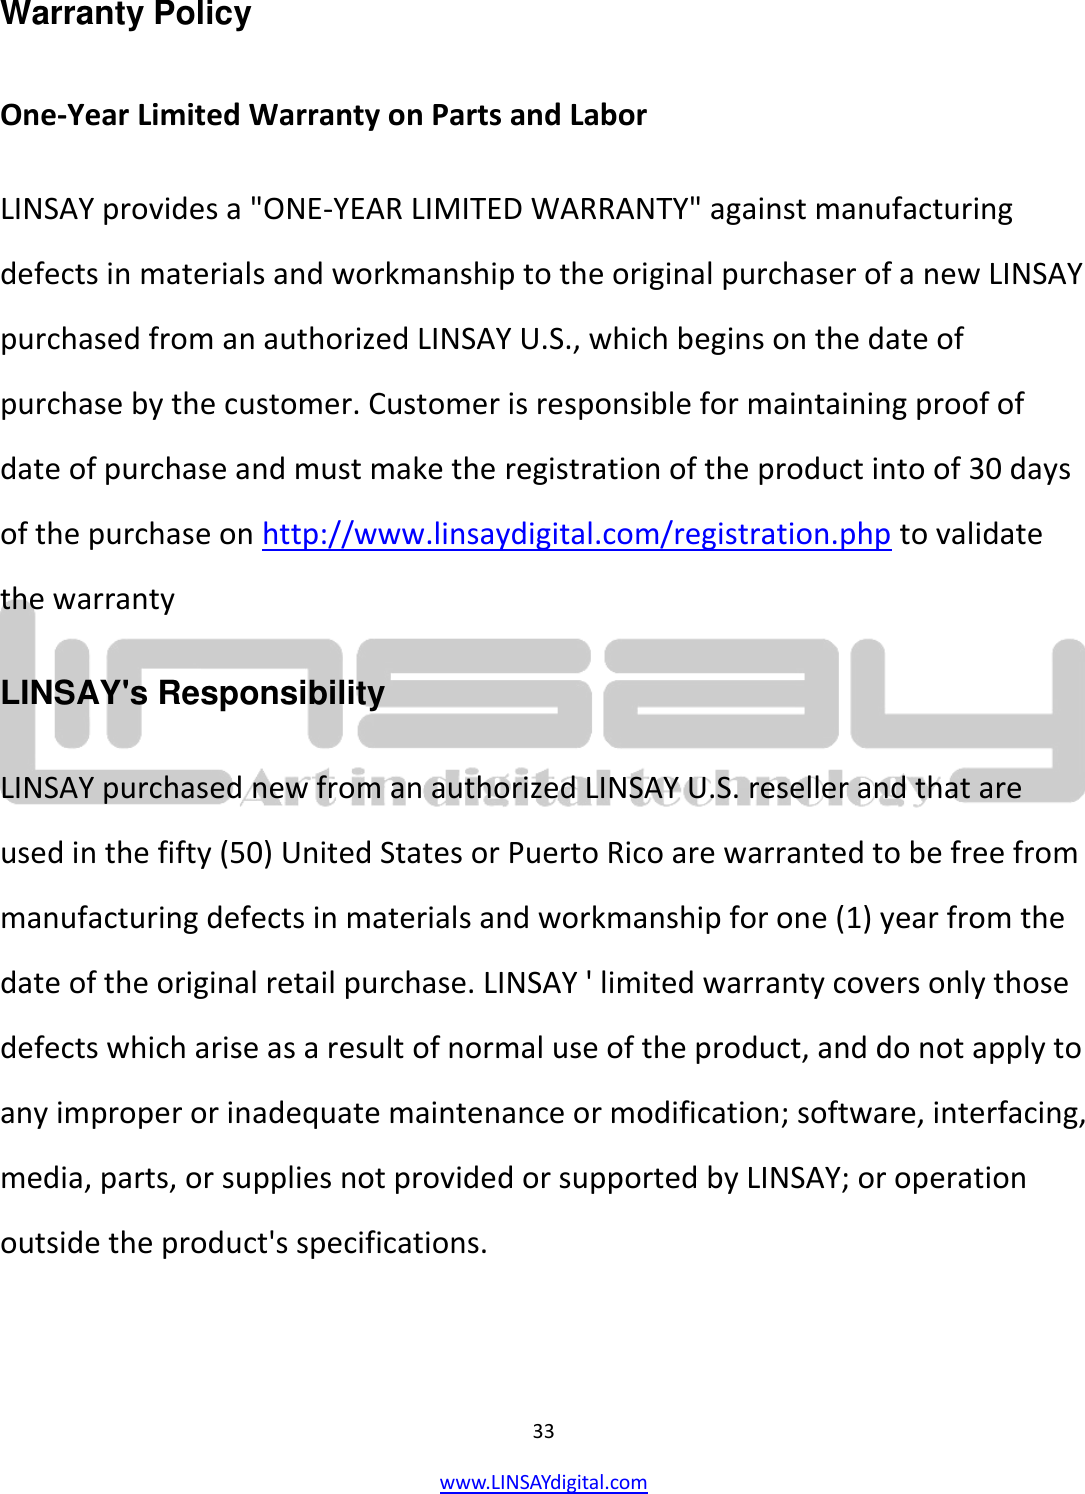  33 www.LINSAYdigital.com   Warranty Policy  One-Year Limited Warranty on Parts and Labor LINSAY provides a &quot;ONE-YEAR LIMITED WARRANTY&quot; against manufacturing defects in materials and workmanship to the original purchaser of a new LINSAY purchased from an authorized LINSAY U.S., which begins on the date of purchase by the customer. Customer is responsible for maintaining proof of date of purchase and must make the registration of the product into of 30 days of the purchase on http://www.linsaydigital.com/registration.php to validate the warranty LINSAY&apos;s Responsibility LINSAY purchased new from an authorized LINSAY U.S. reseller and that are used in the fifty (50) United States or Puerto Rico are warranted to be free from manufacturing defects in materials and workmanship for one (1) year from the date of the original retail purchase. LINSAY &apos; limited warranty covers only those defects which arise as a result of normal use of the product, and do not apply to any improper or inadequate maintenance or modification; software, interfacing, media, parts, or supplies not provided or supported by LINSAY; or operation outside the product&apos;s specifications. 